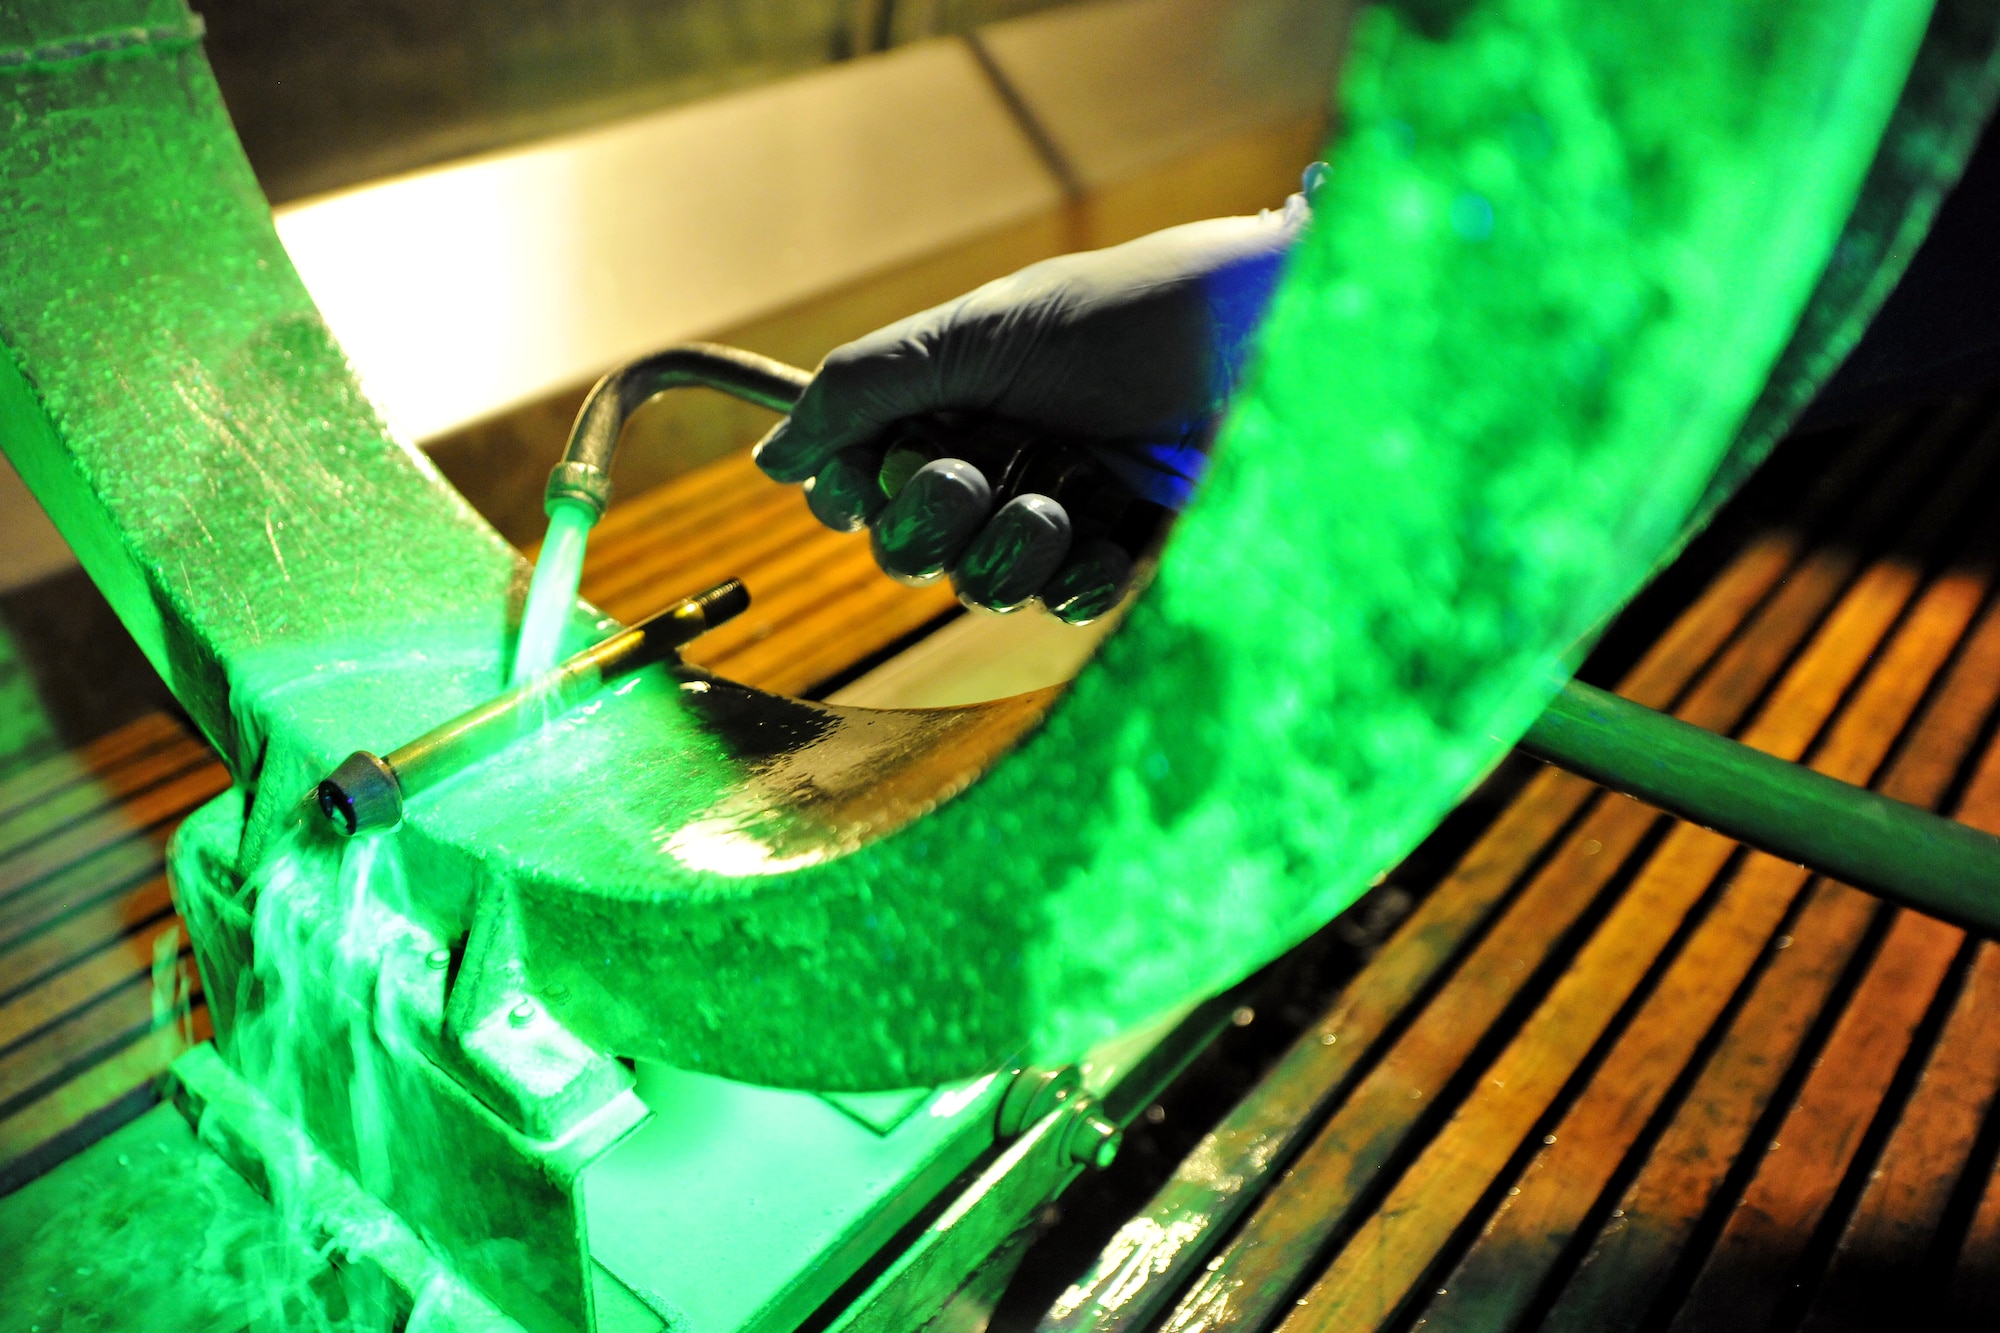 Fluorescent magnetic particle bath flows over a nose landing gear wheel bolt during an inspection, July 31, 2013, Ramstein Air Base, Germany.  The fluorescent color comes from suspended iron particles which glow while under a black light.  These iron particles are attracted to leakage fields caused by cracks in ferrous materials after being magnetized.  (U.S. Air Force photo/Senior Airman Chris Willis)